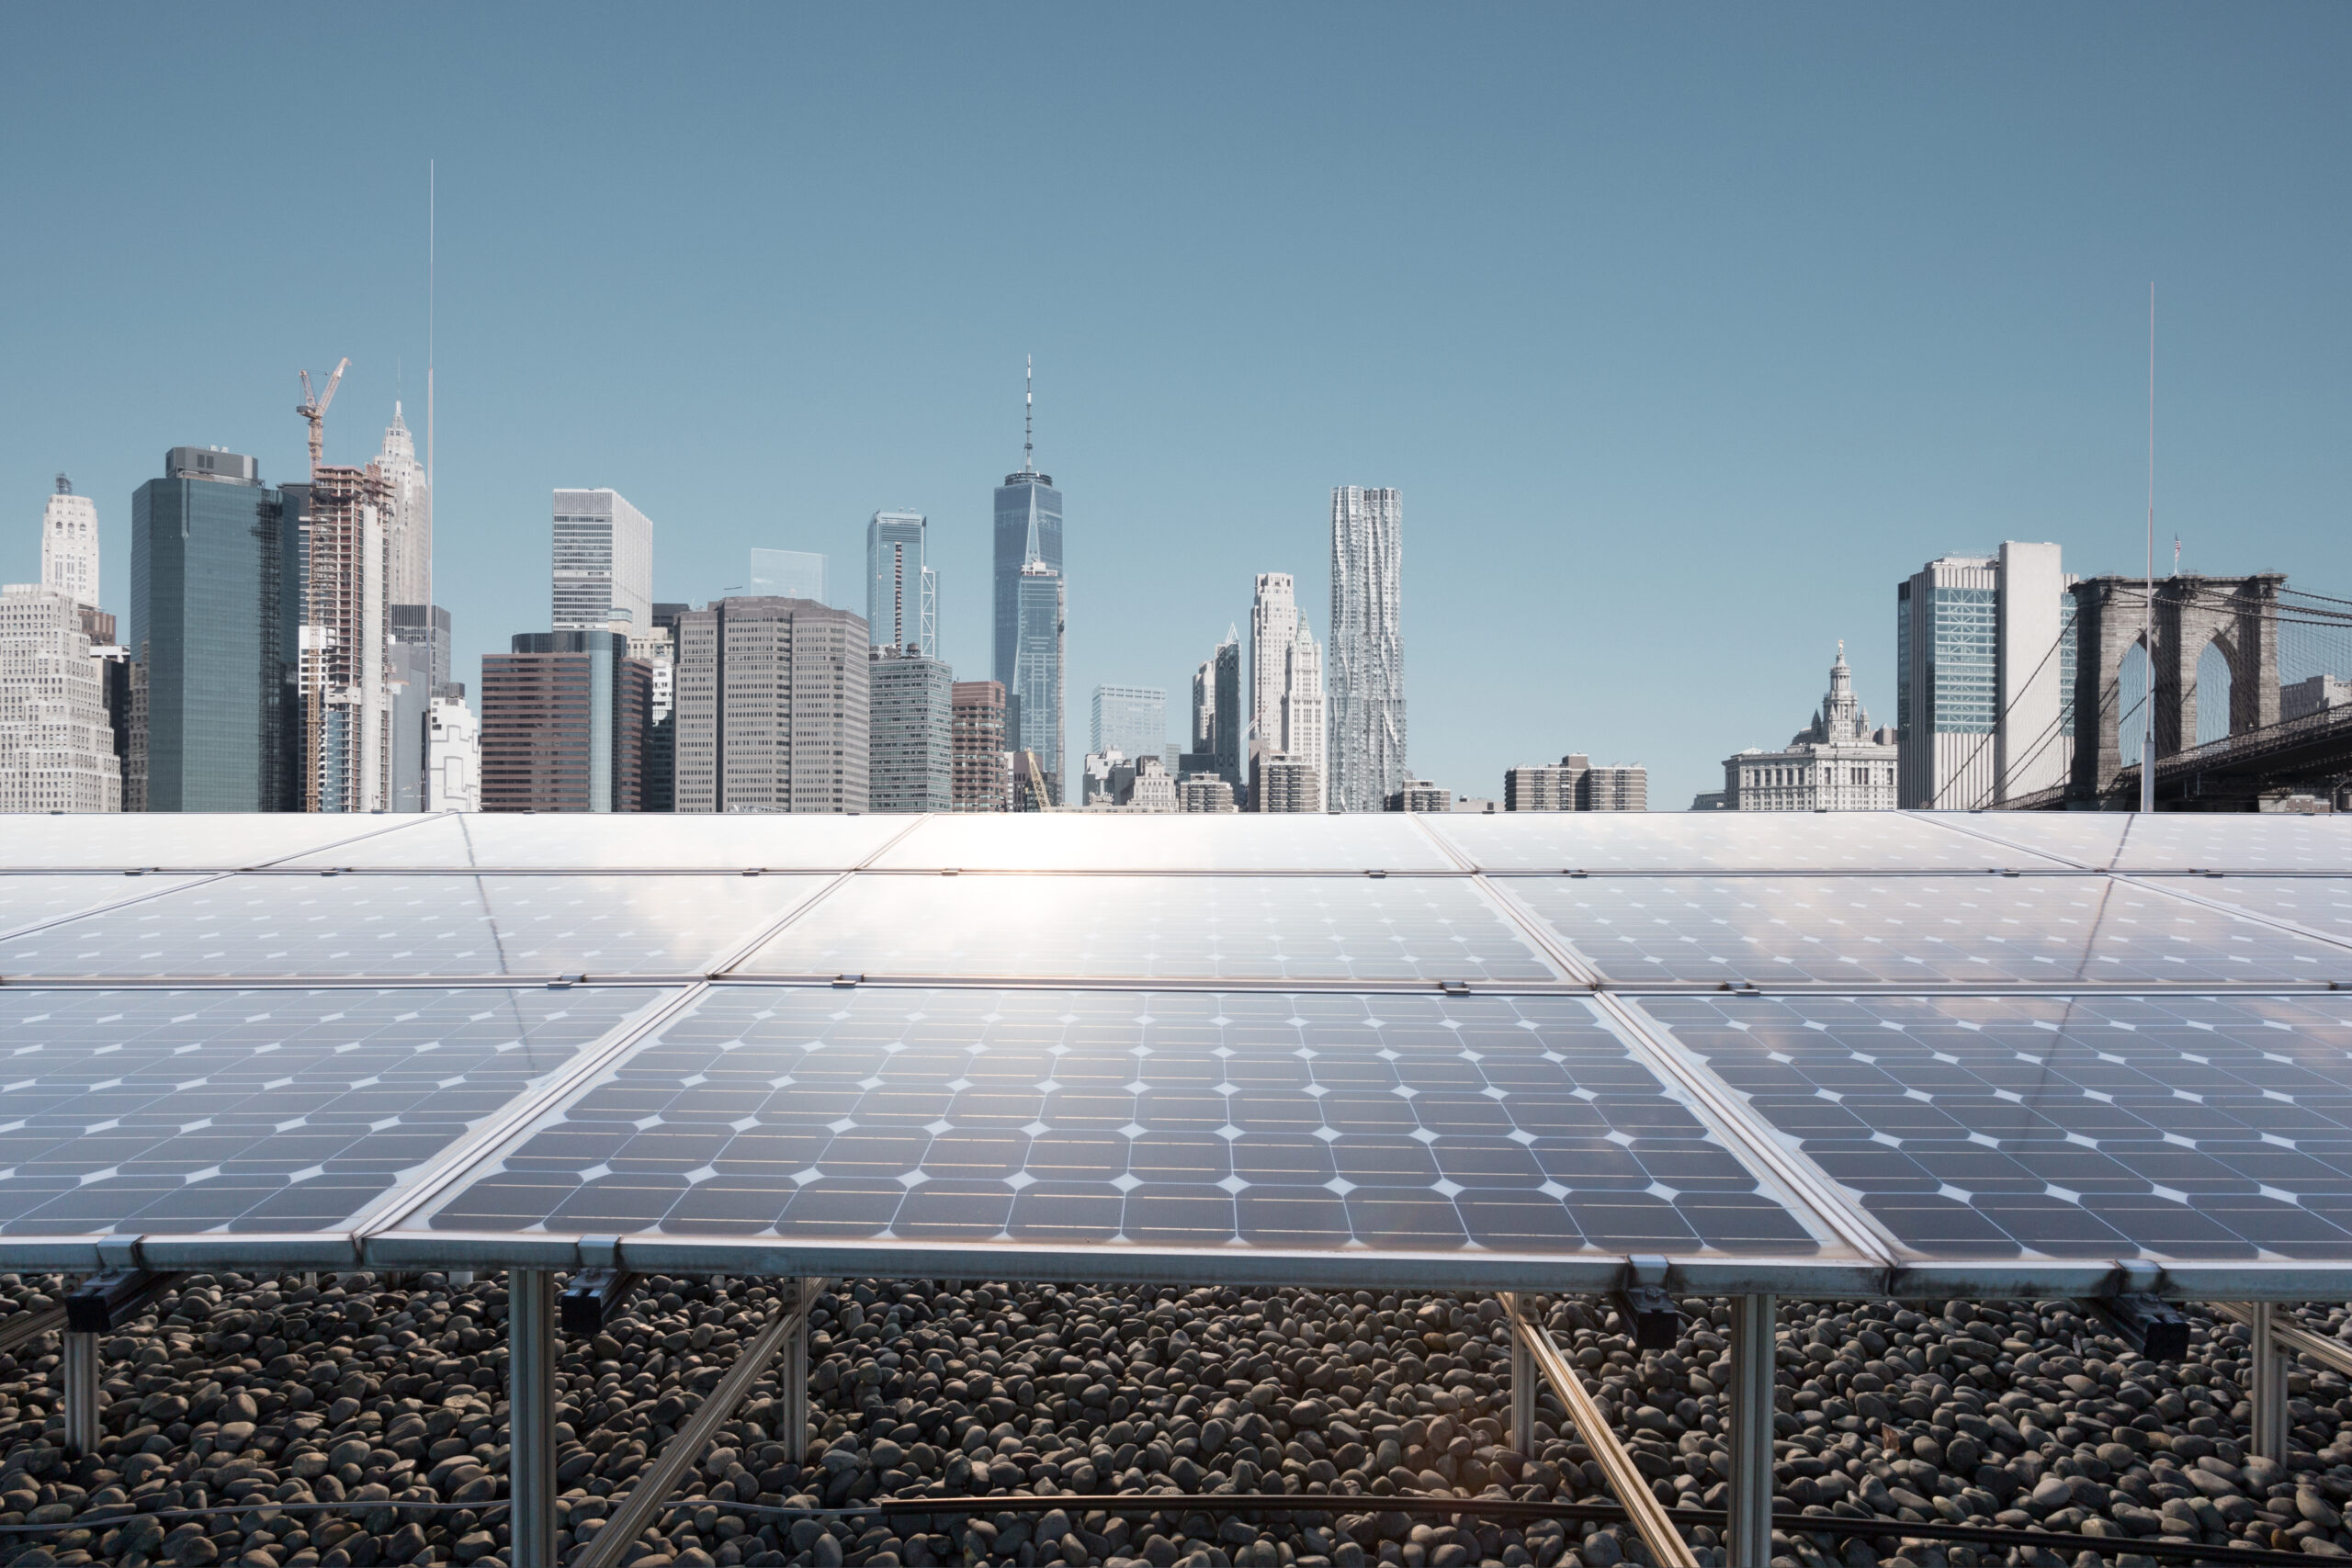 Vote Solar supports passage of New York’s Build Public Renewables Act